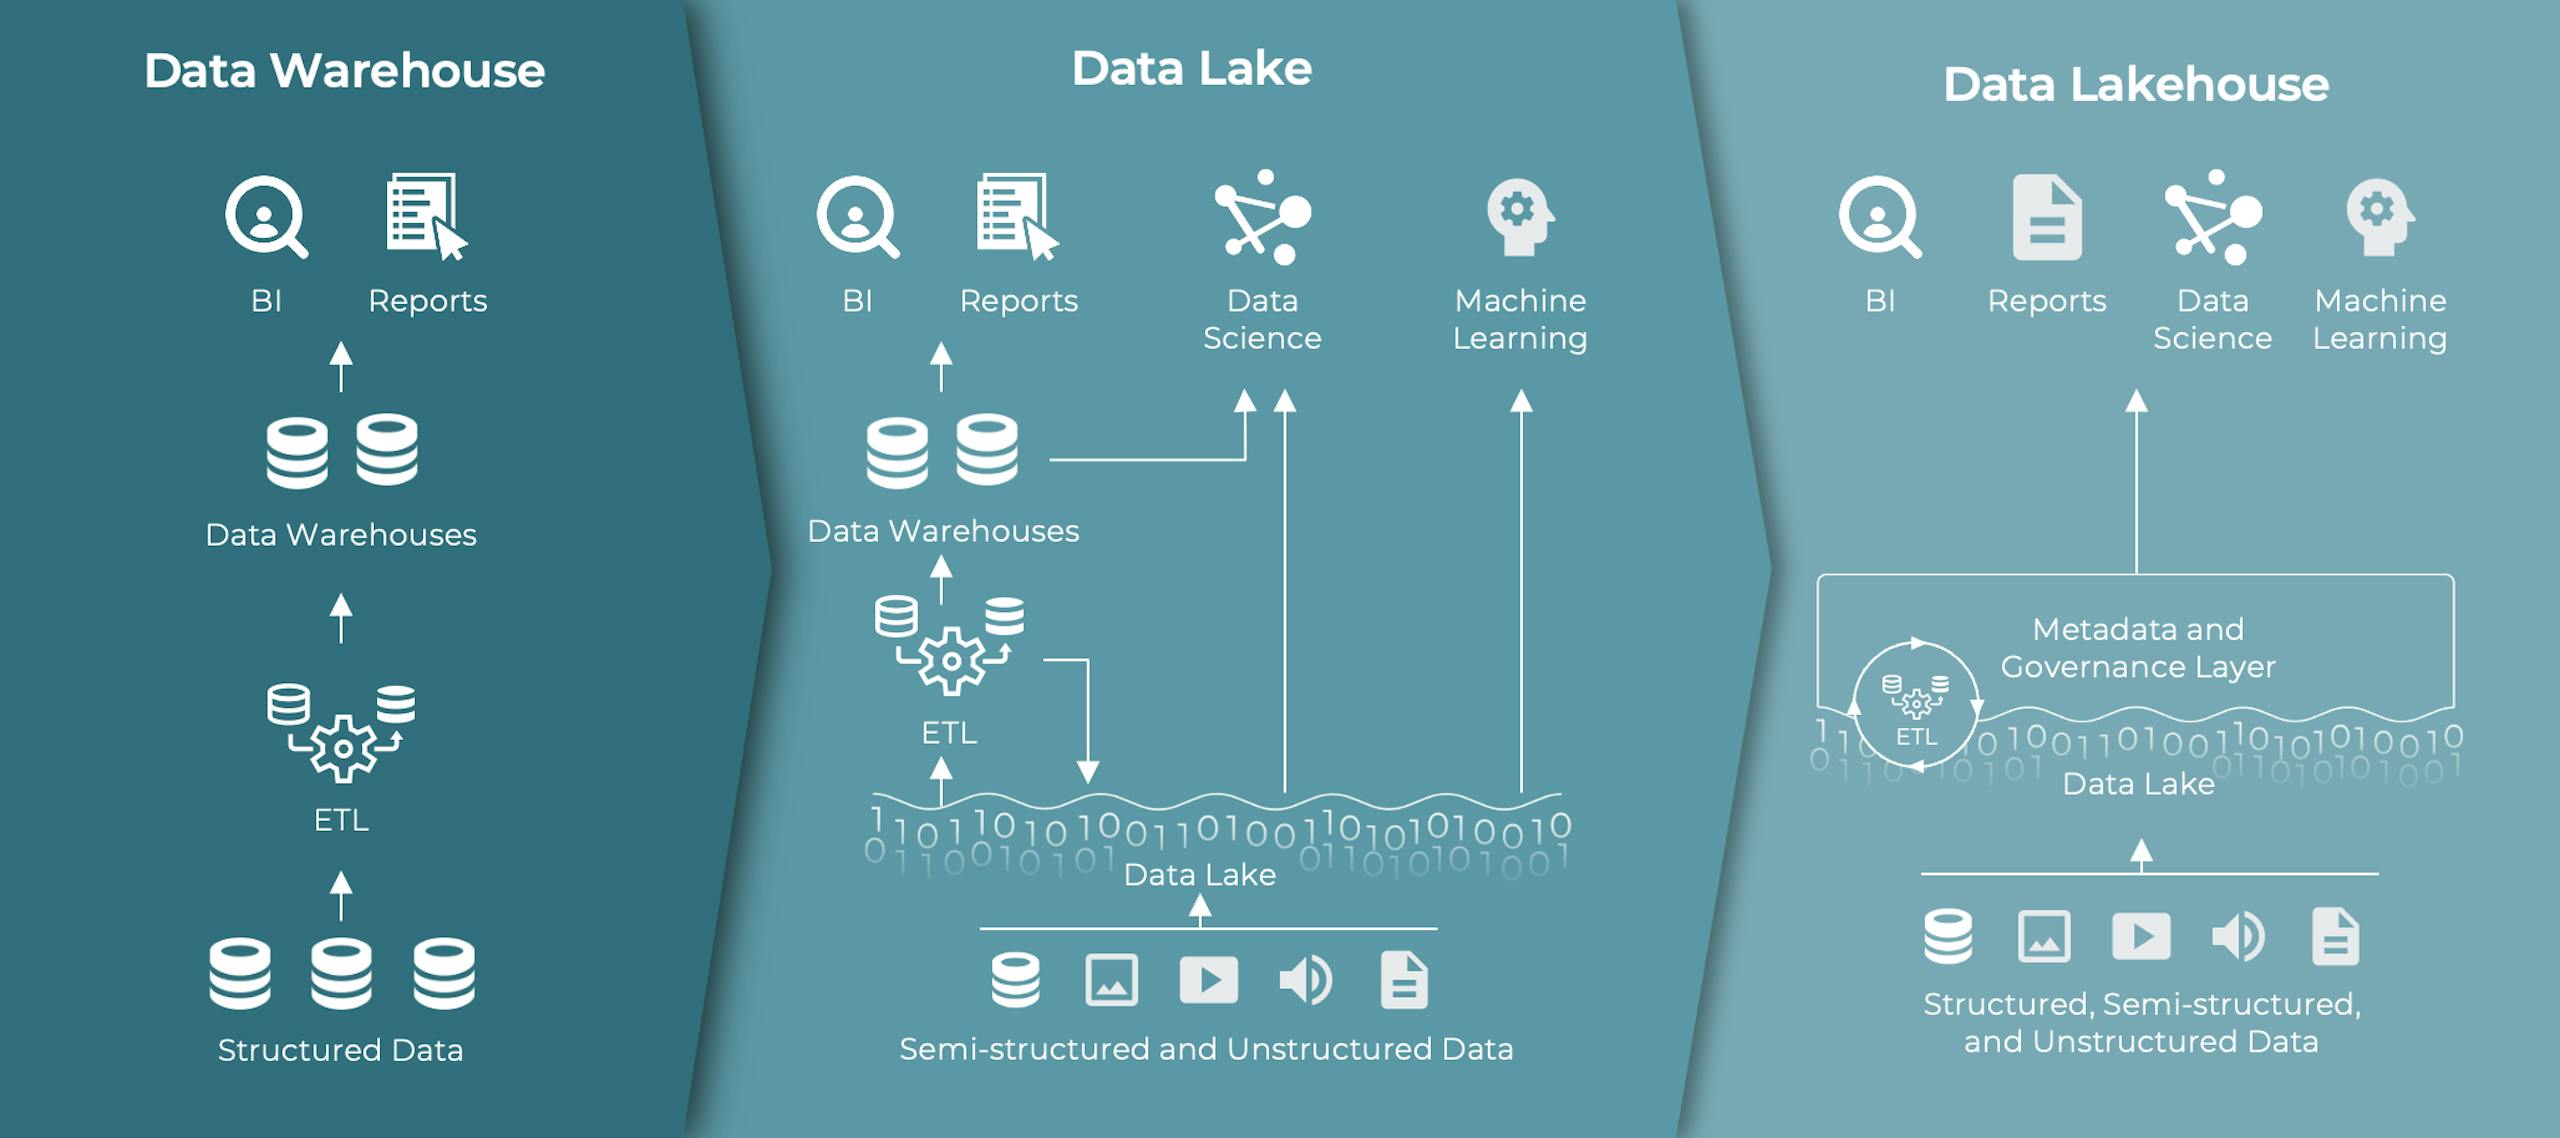 3 architecture diagrams showing how big data storage environments work, one each for Data Warehouse, Data Lake, and Data Lakehouse